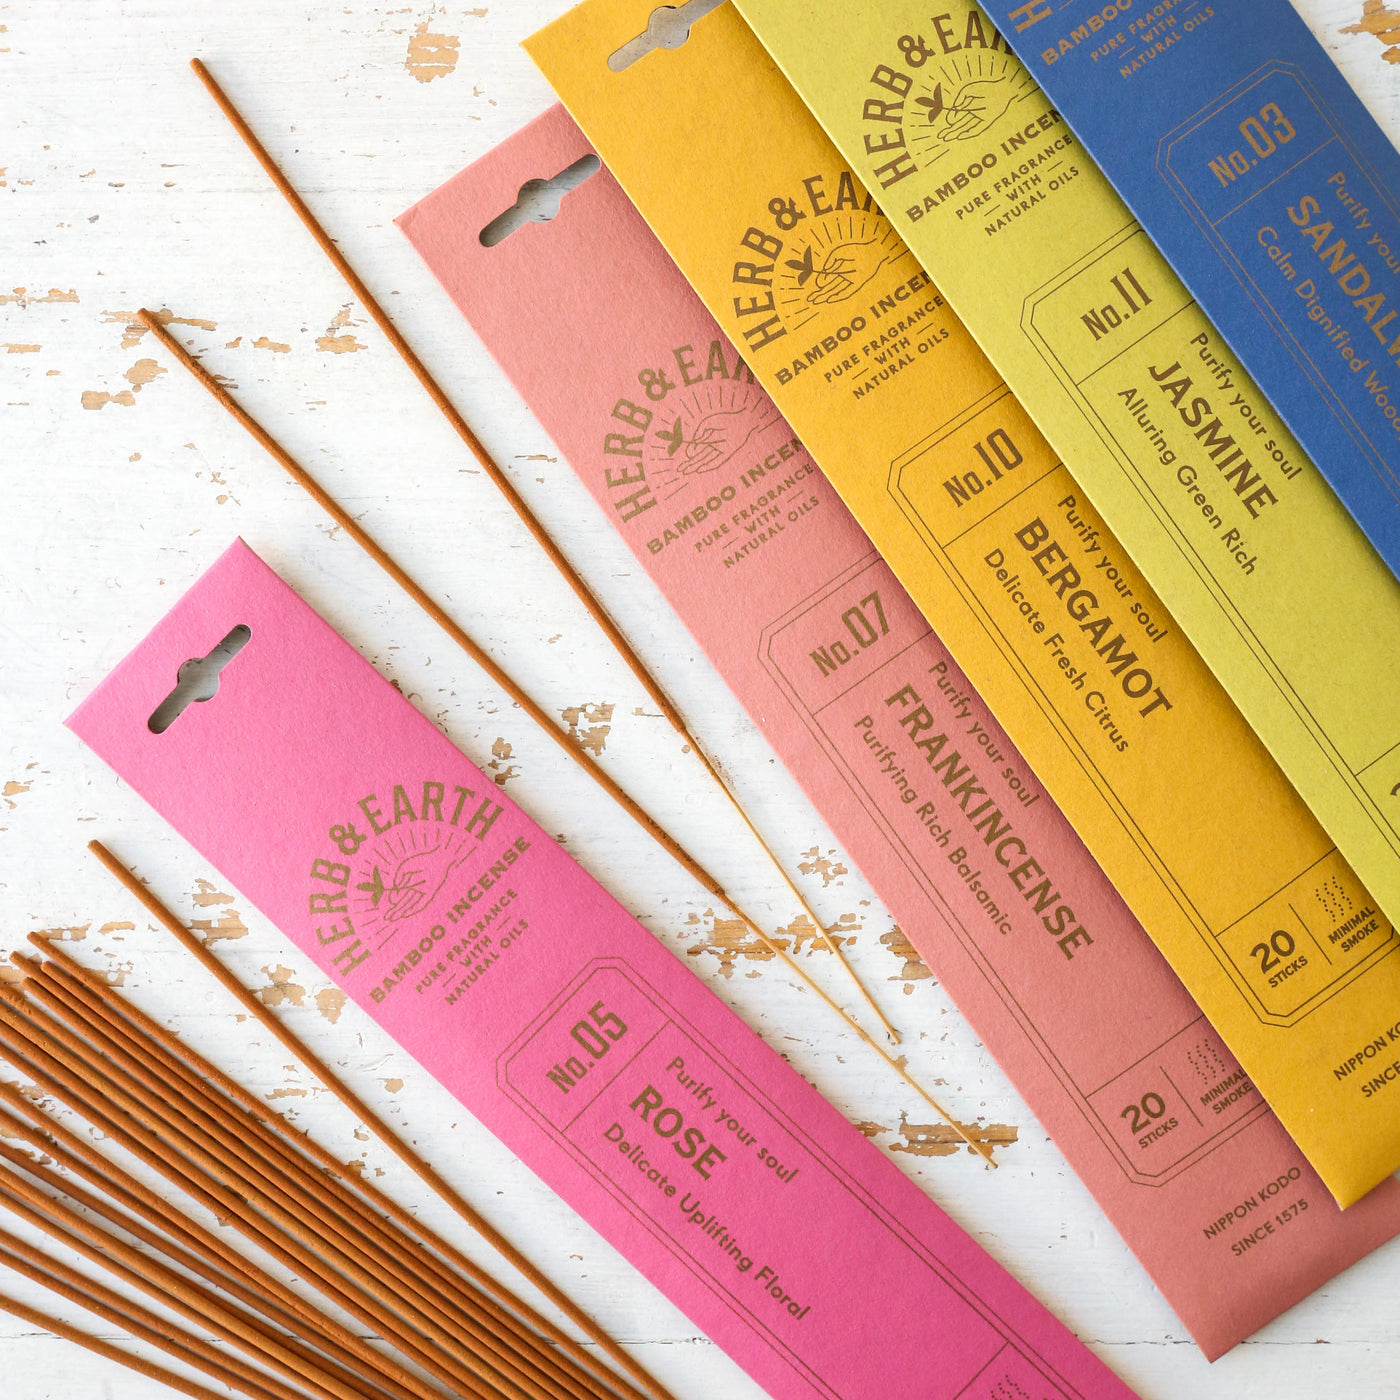 Herb & Earth Bamboo Incense Sticks - 20 Pack